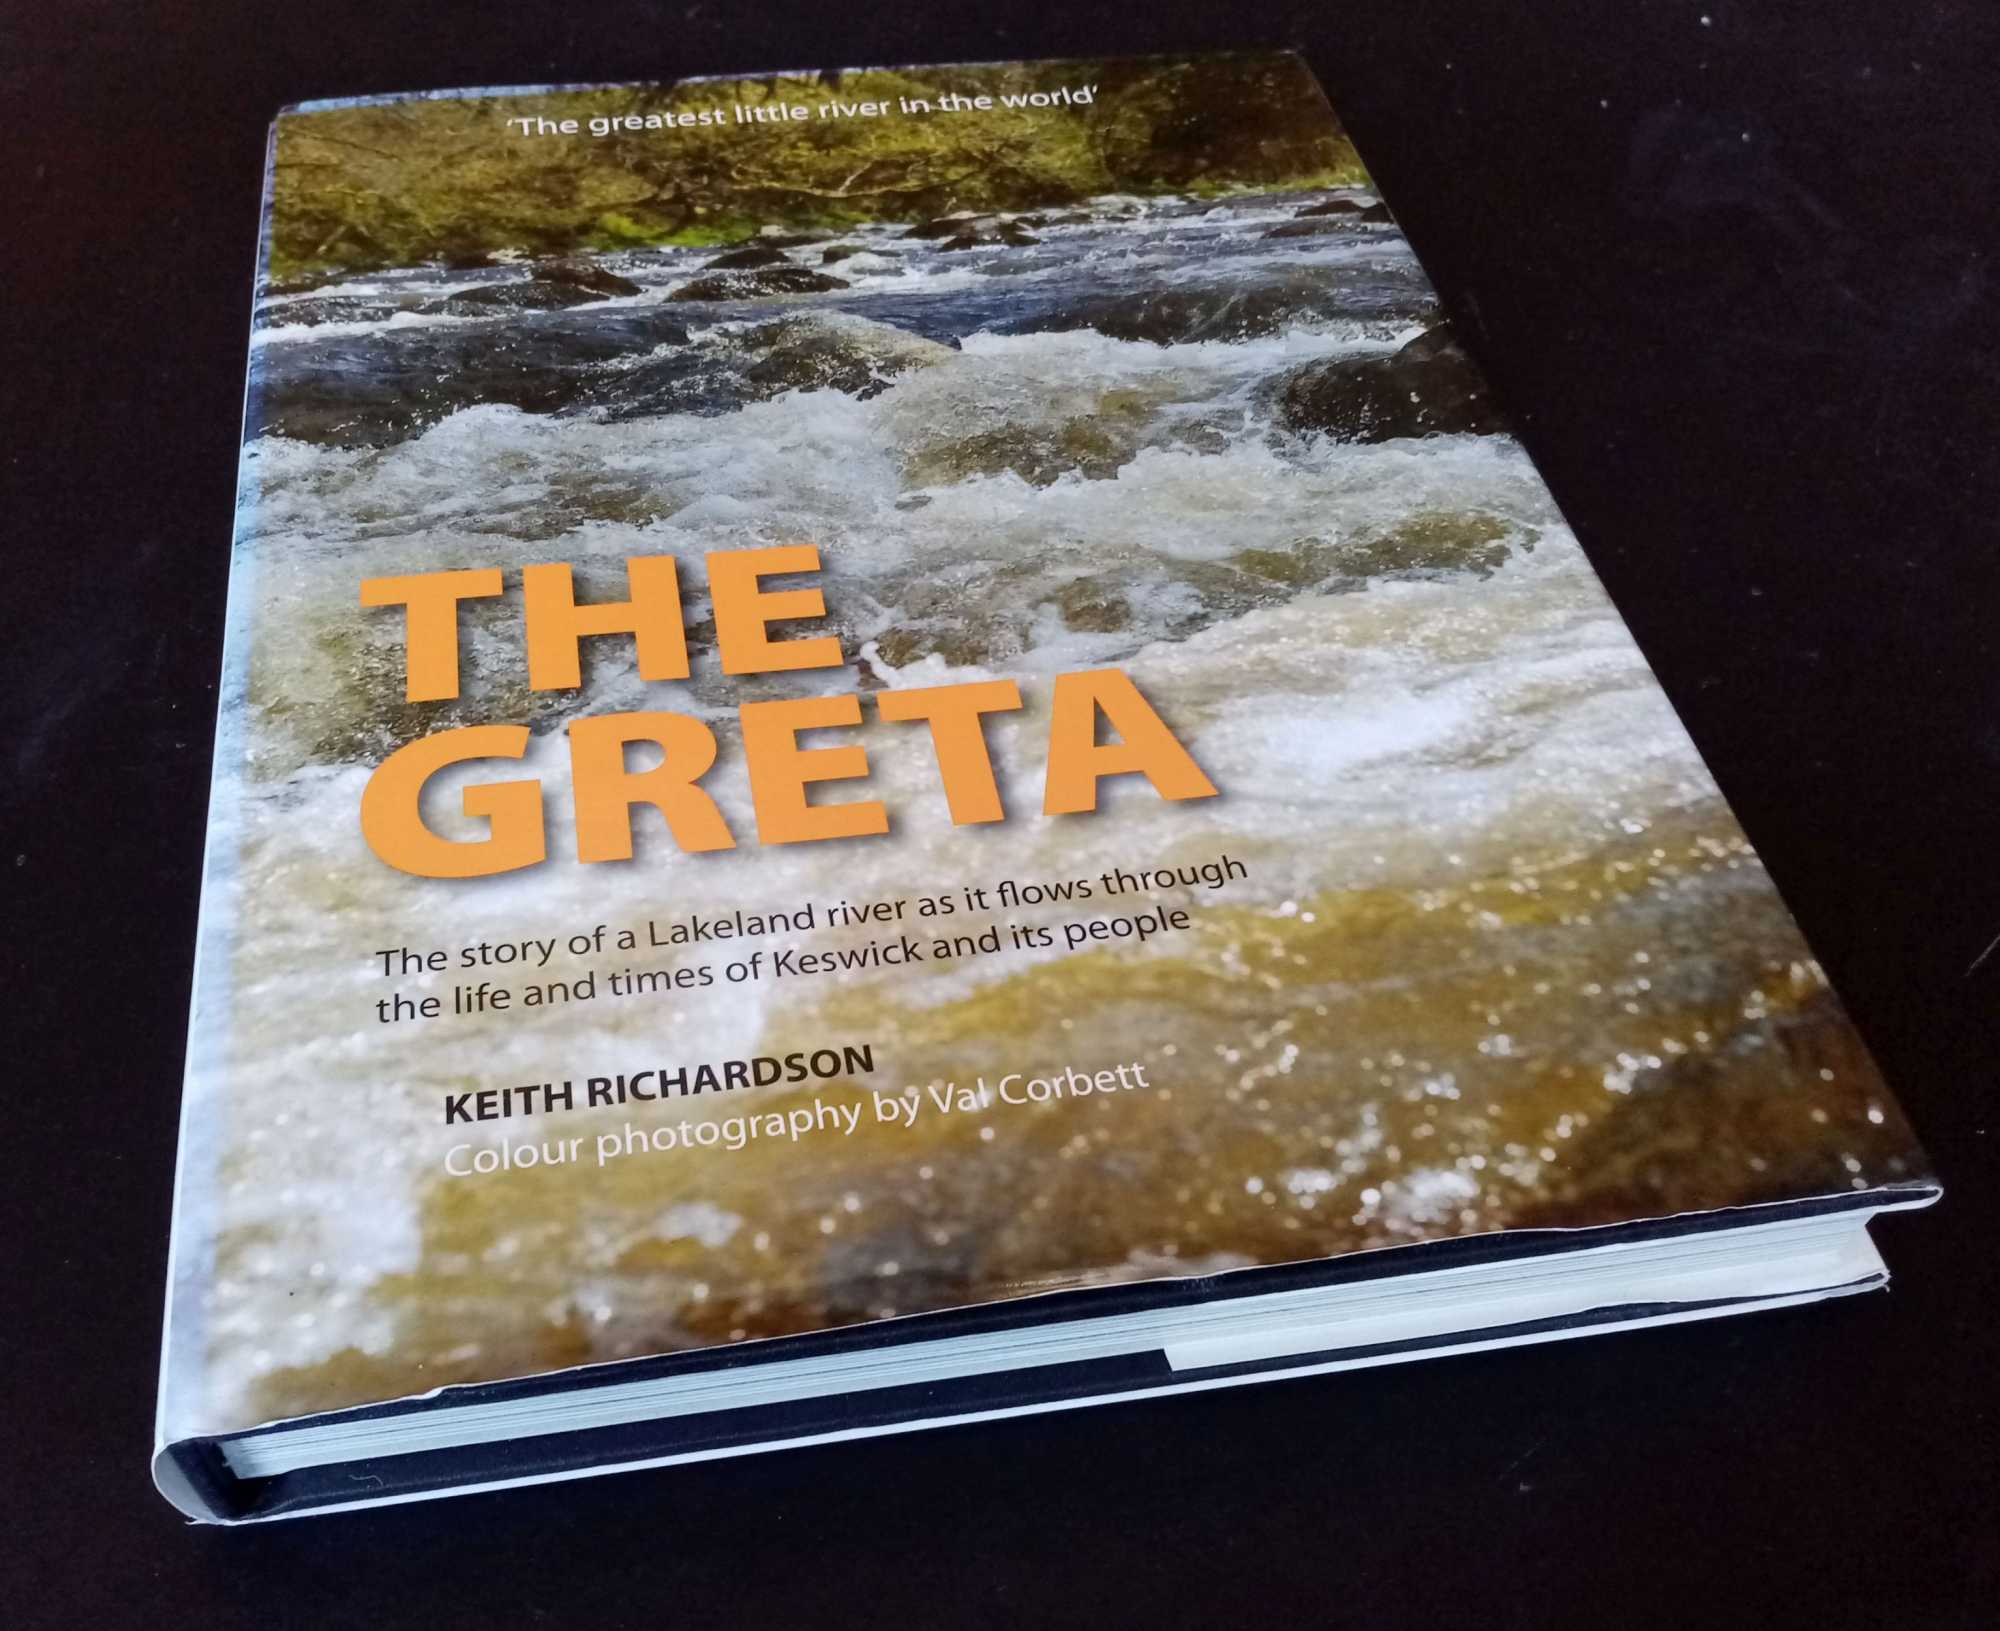 Keith Richardson - The Greta: The Story of a Lakeland River as it Flows Through the Life and Times of Keswick and Its People    SIGNED